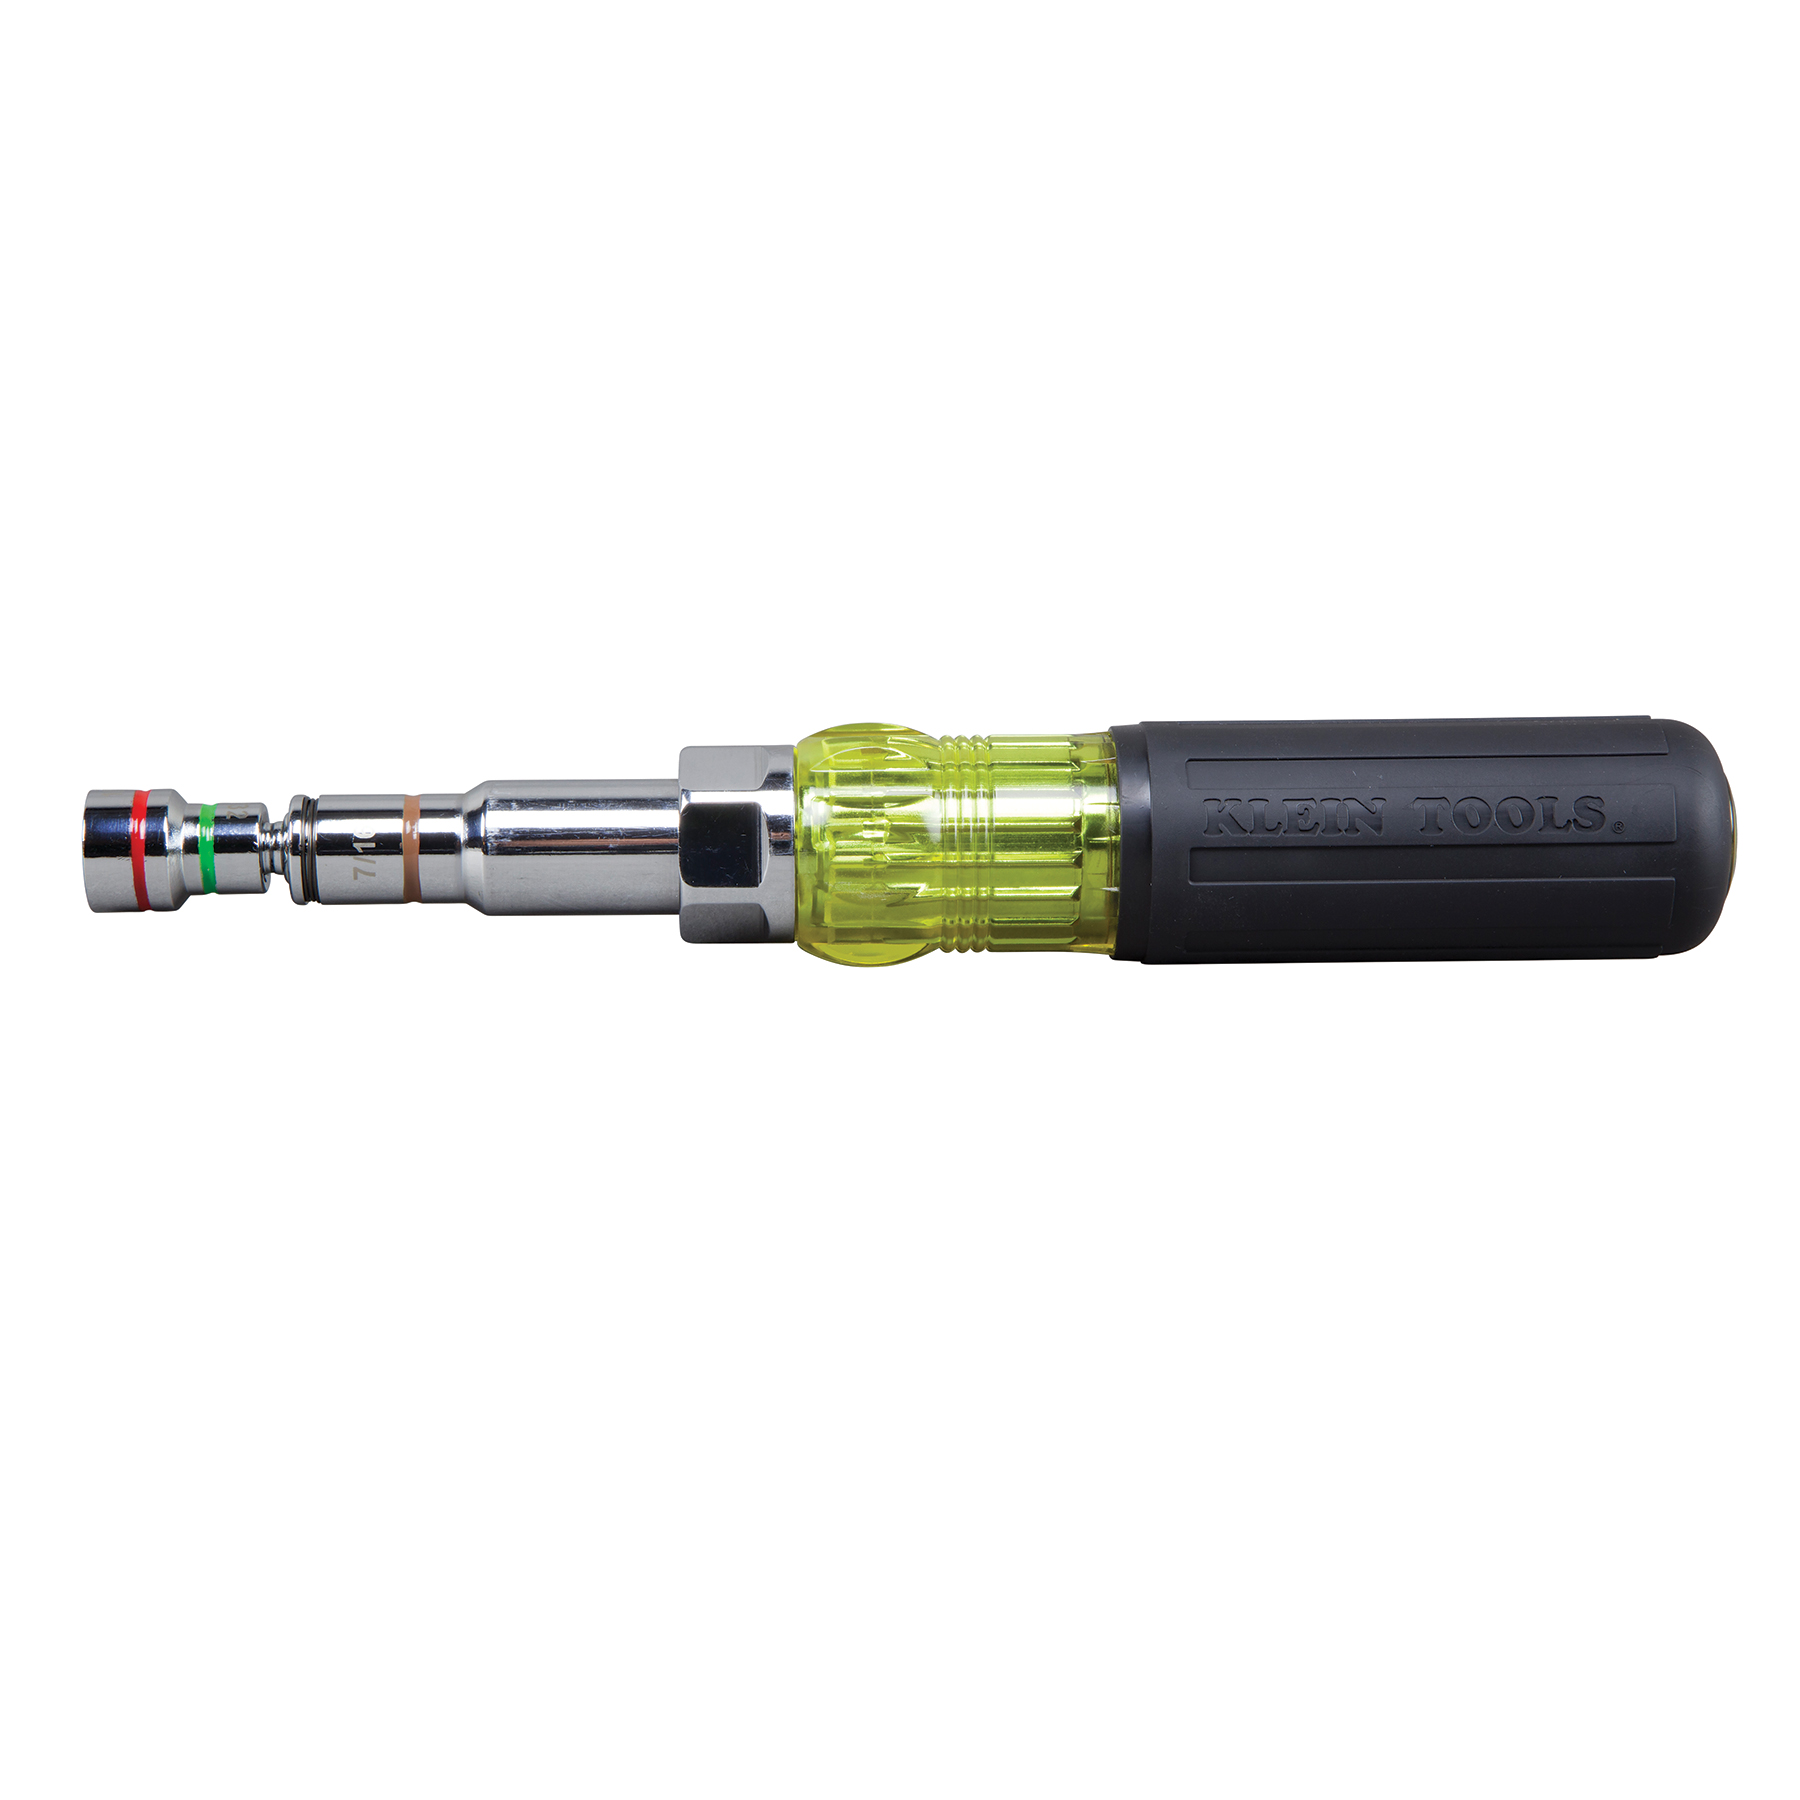 NUT DRIVER, 7-IN-1